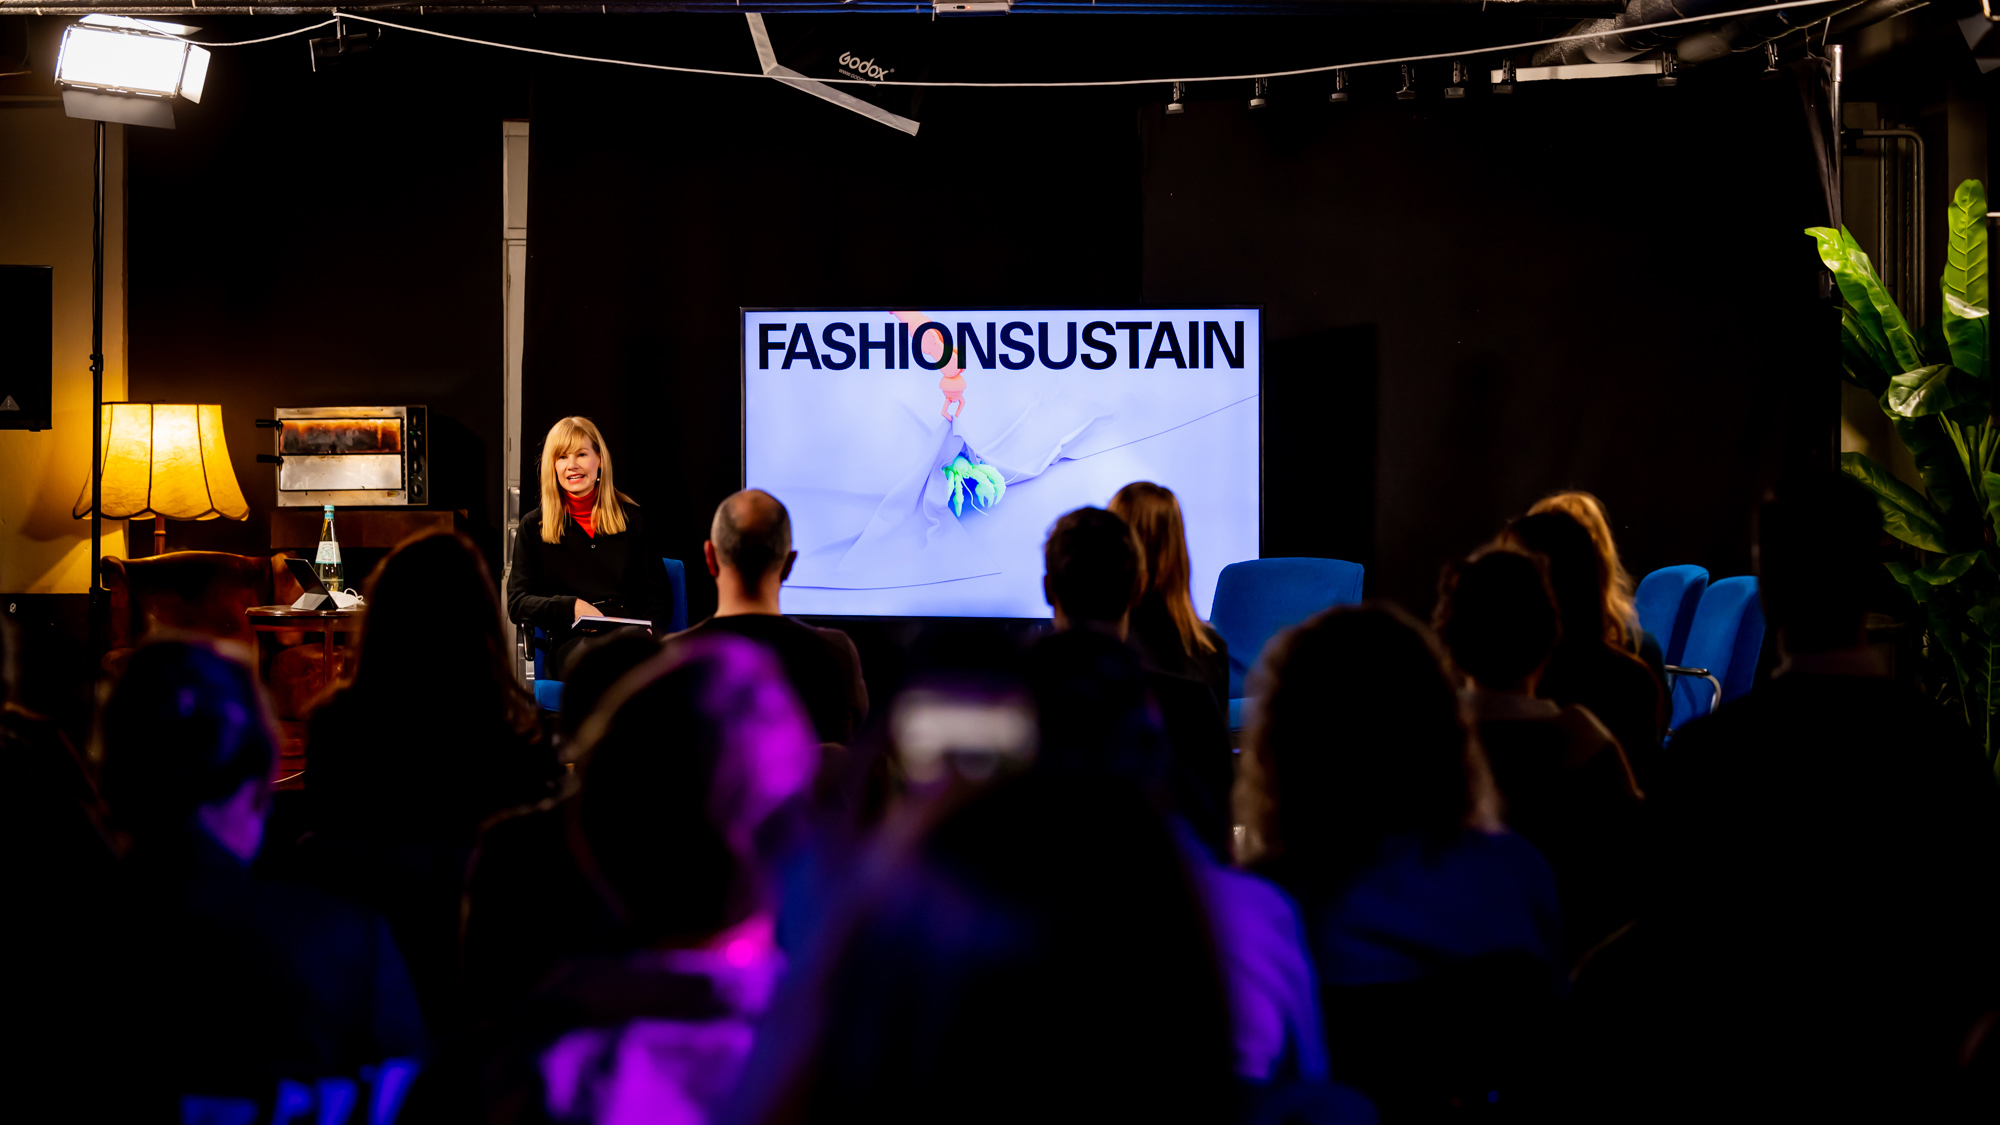 Lecture at "Fashionsustain. The conference."